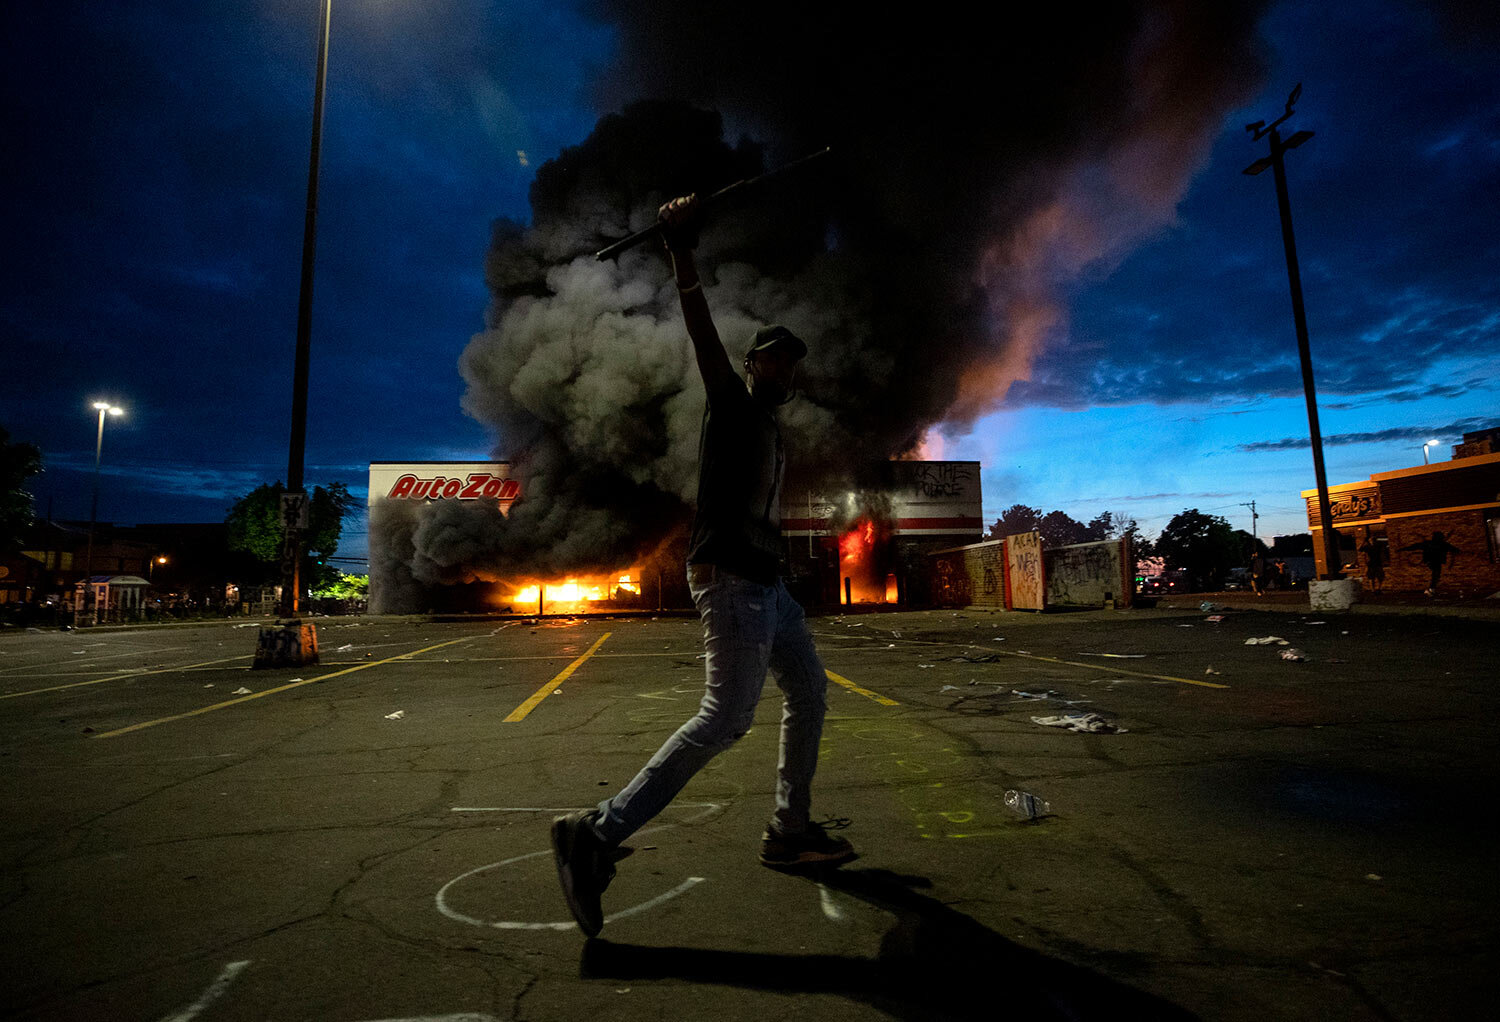  A man poses in the parking lot of an AutoZone store in flames, while protesters hold a rally against the death of George Floyd in Minneapolis on Wednesday, May 27, 2020. (Carlos Gonzalez/Star Tribune via AP) 